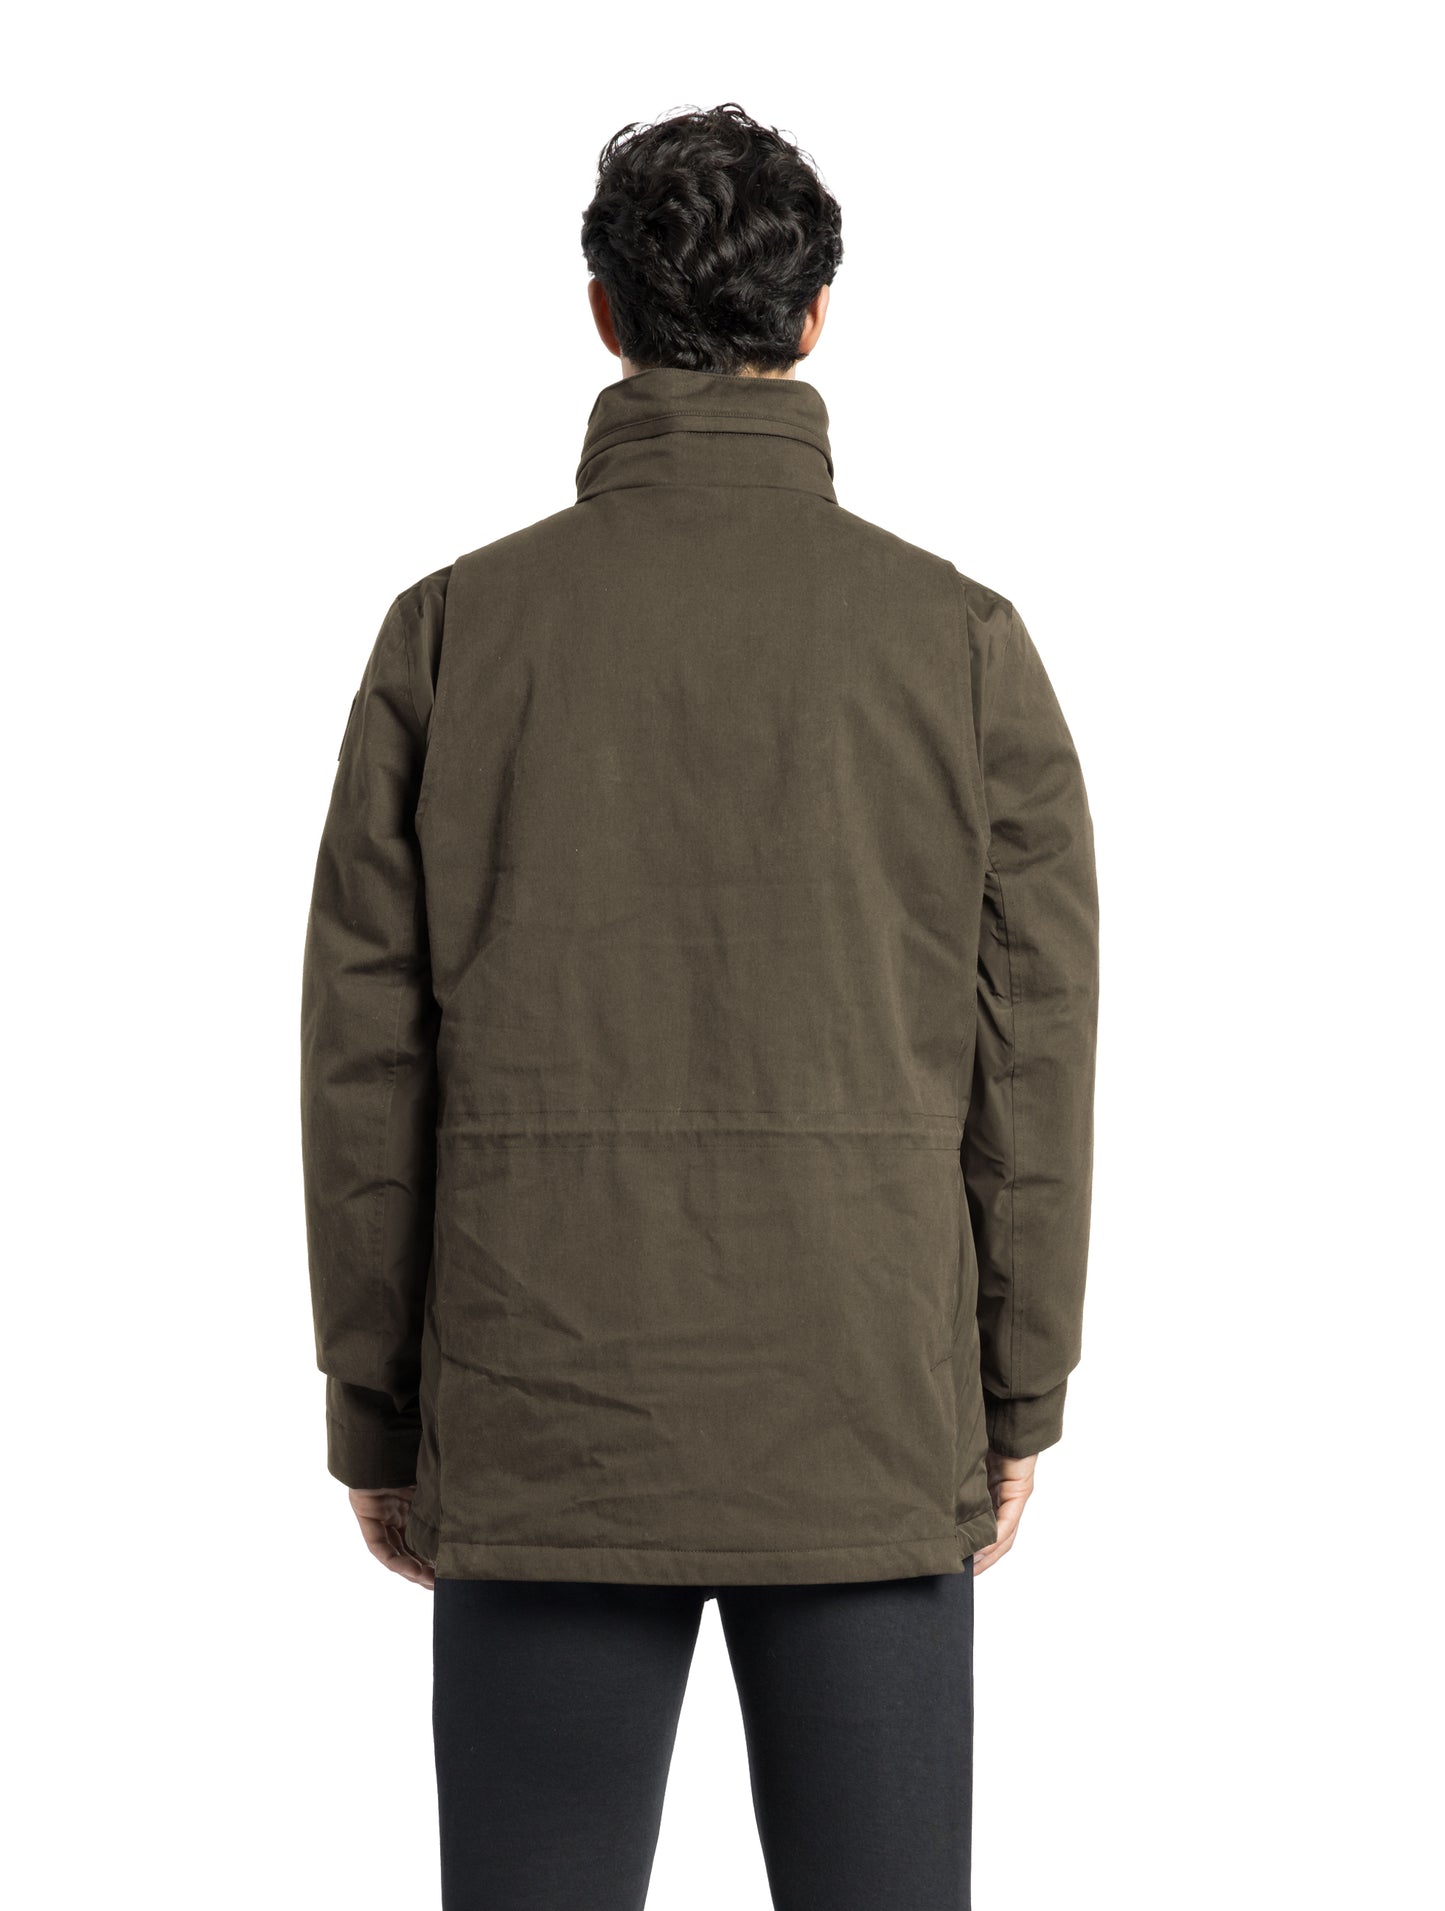 Pelican Men's Tailored Field Jacket in hip length, premium cotton blend and 3-ply micro denier fabrication, Premium Canadian origin White Duck Down insulation, tuck away, waterproof hood in premium cire technical nylon taffeta, two-way centre-front zipper with magnetic wind flap, pit zipper vents, magnetic closure chest and waist flap pockets, hidden adjustable waist drawcord, and action back detailing, in Fatigue